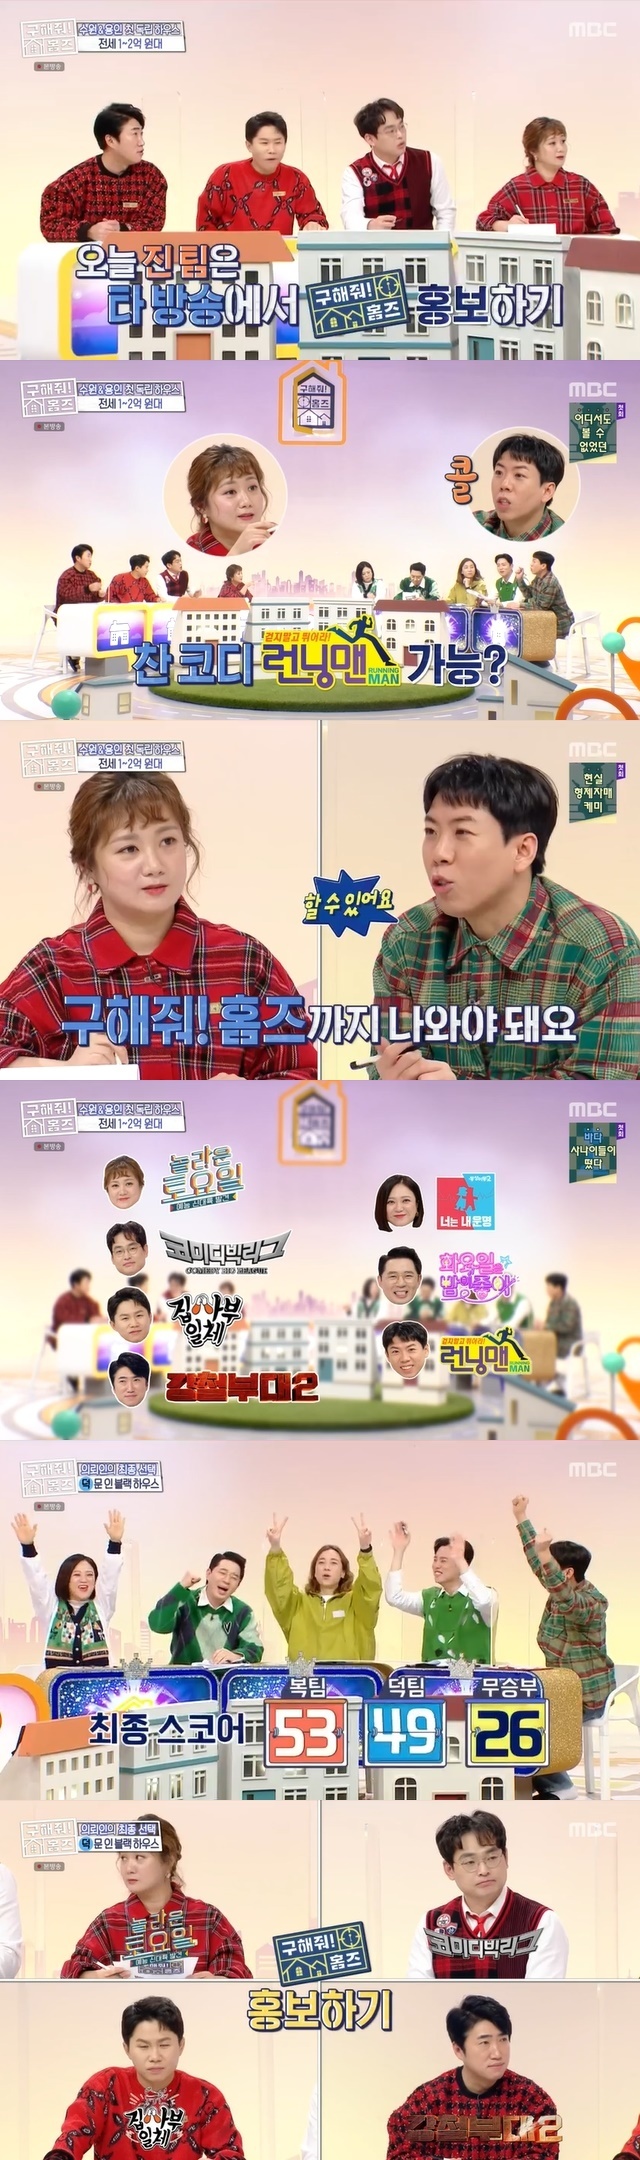 Park Na-rae, Yang Se-hyeong, Park Young-jin and Jang Dong-min won the publicity penalty for other broadcasts Homes.MBC entertainment Where is My Home (hereinafter referred to as Homes), which was broadcast on January 2, featured a single-person household The Client who visited a house within 30 minutes to the Yong-In amusement park, an office worker.The desired area was Yong-In, Suwon, Gyeonggi Province, and wanted a house with many basic options and sensual interiors. The budget was up to 200 million won.Duck Team Cody, Hannyeon, Boom introduced a new sale in Uman-dong, Paldal-gu, Suwon, 20 minutes to the Clients workplace.There was a university 10 minutes walk away from the city-style living house, so I was able to enjoy the university infrastructure.The interior was admirable with a clean white tone and bright and bright lighting.In contrast to these white interiors, the color of the door, the window frame, and the lighting were decorated with point black, and Boom named the house Moon in Black House, saying, It is like the waiting room of a Broadway actor.The basic options were system air conditioners, and in the kitchen, washing machines, dryers, refrigerators, and inductions were basic options.The room was a guest room or a built-in room for a dress room, and a room with a sufficient bed. Finally, the bathroom was a clean room with a shower space.The rent was 230 million won.On the other hand, Park Na-rae suddenly attracted attention by shouting the title of TVN drama Bad and Crazy starring actor Lee Dong-wook and Wi Ha-joon during the introduction of the sale.Park Na-rae confessed to the coordinators who demanded explanation with a puzzled expression that it was the performance of the bet penalty that was taken at the TVN entertainment Amazing Saturday Doremi Market.On the spot, Jang Dong-min suggested Lets ask and go to double and Homes coordinators also challenge the bet.The team that is defeated in this sale show is to shout the full name of Save Me Homes in each other broadcasting station program.Park Na-rae said, So is Running Man possible? Yang Se-chan said, and Yang Se-chan said, Running Man is somehow possible.I can do it, he said, accepting the bet.The mission program is Yang Se-hyeong SBS Death of Deacon, Park Na-rae tvN Amazing Saturday Doremi Market, Jang Dong-min Channel A Steel Unit 2, Park Young-jin tvN Comedy Big League, Kim Sook SBS Sangmong 2 - You Are My Destiny, Boom TV Chosun  It was decided to be SBS Running Man.Boom said, How many pros are you promoting? Yang Se-hyeong laughed, I will blow blood if I lose today.Since then, The Clients Choices have been Ducks Moon in Black House.The Client said, It was the best thing to be able to separate the bedroom and the dress room because there were two rooms, and it was felt that it would be easy to clean because it was suitable in size.And I think I can go in only because it is a full option. 